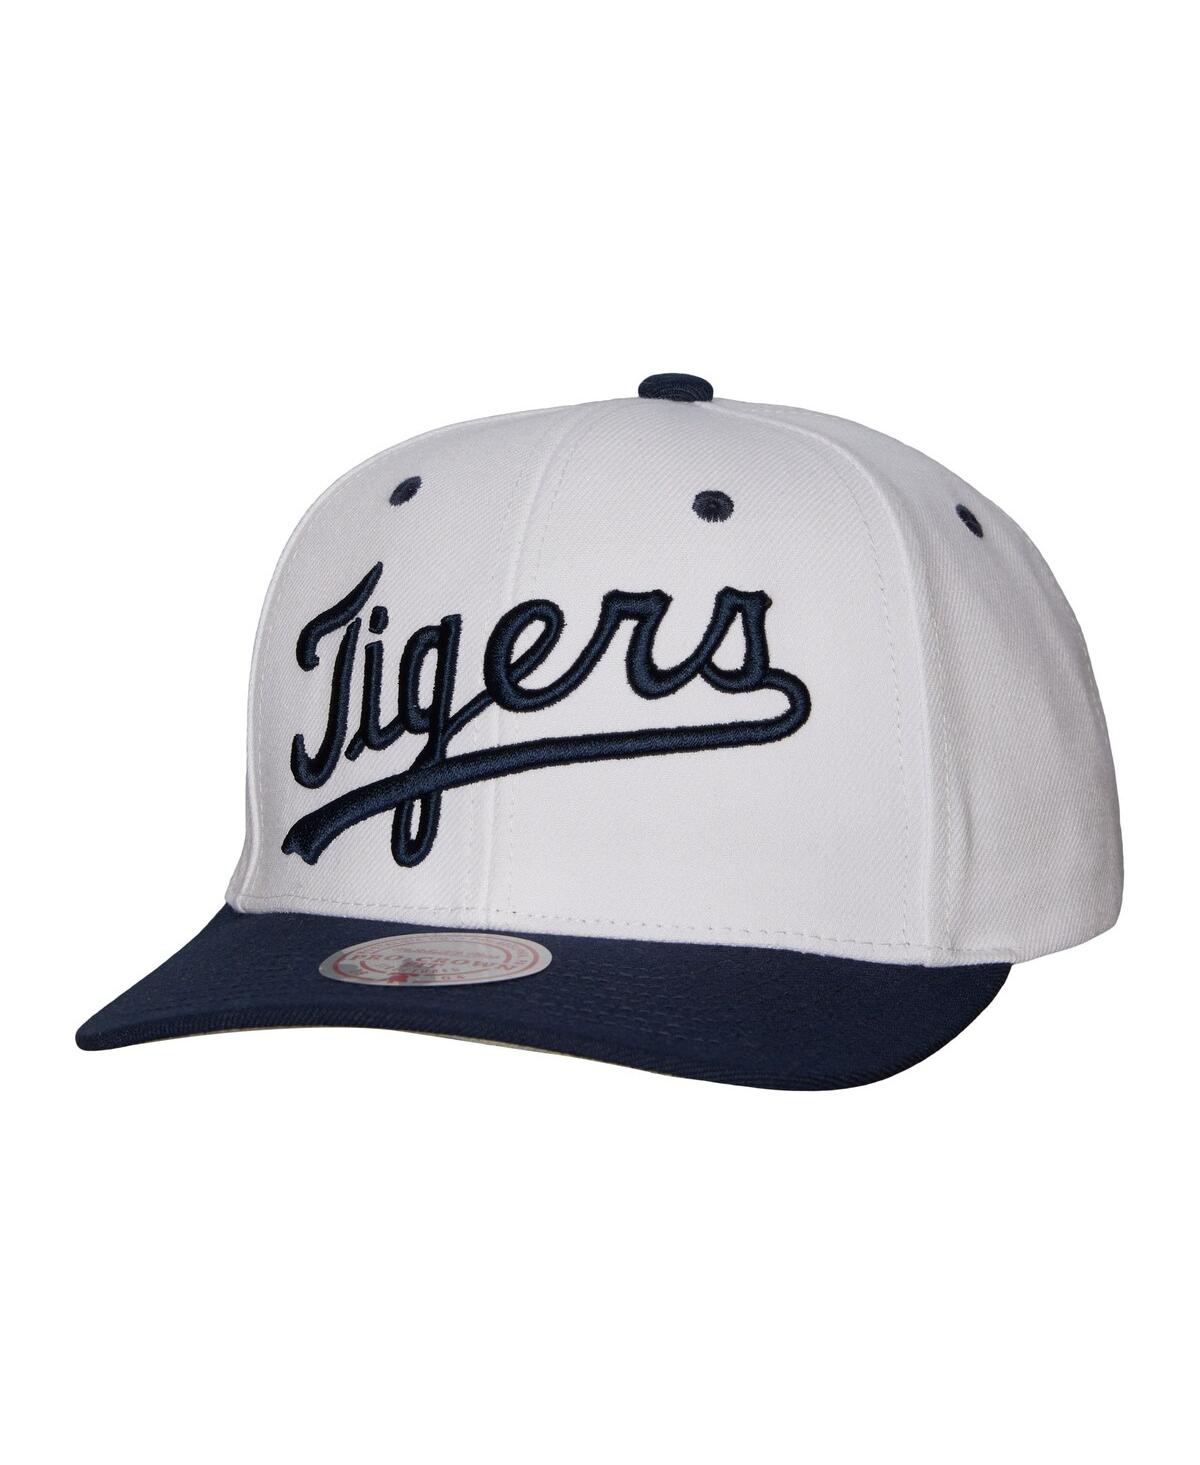 Mitchell & Ness Men's  White Detroit Tigers Cooperstown Collection Pro Crown Snapback Hat